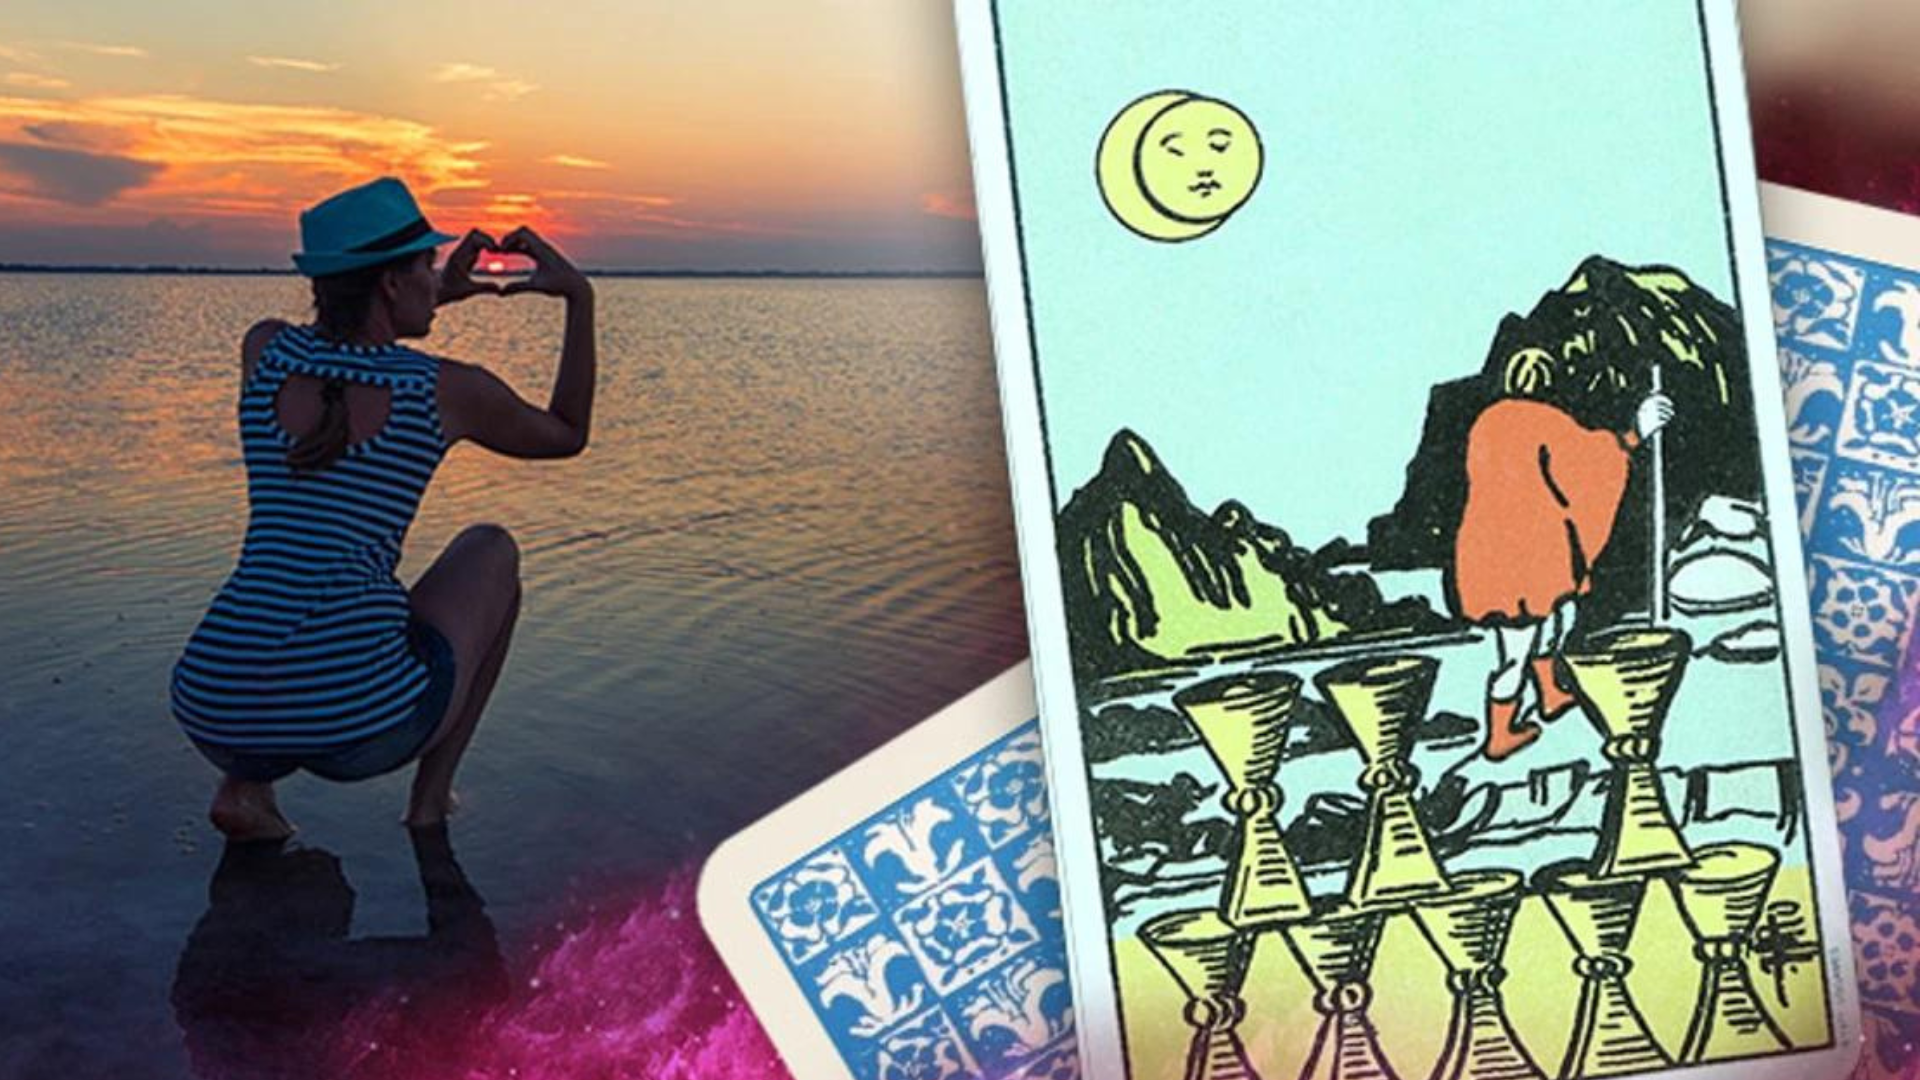 A woman doing a heart shaped hand gesture at the sea with Eight Of Cups Tarot Card on the right